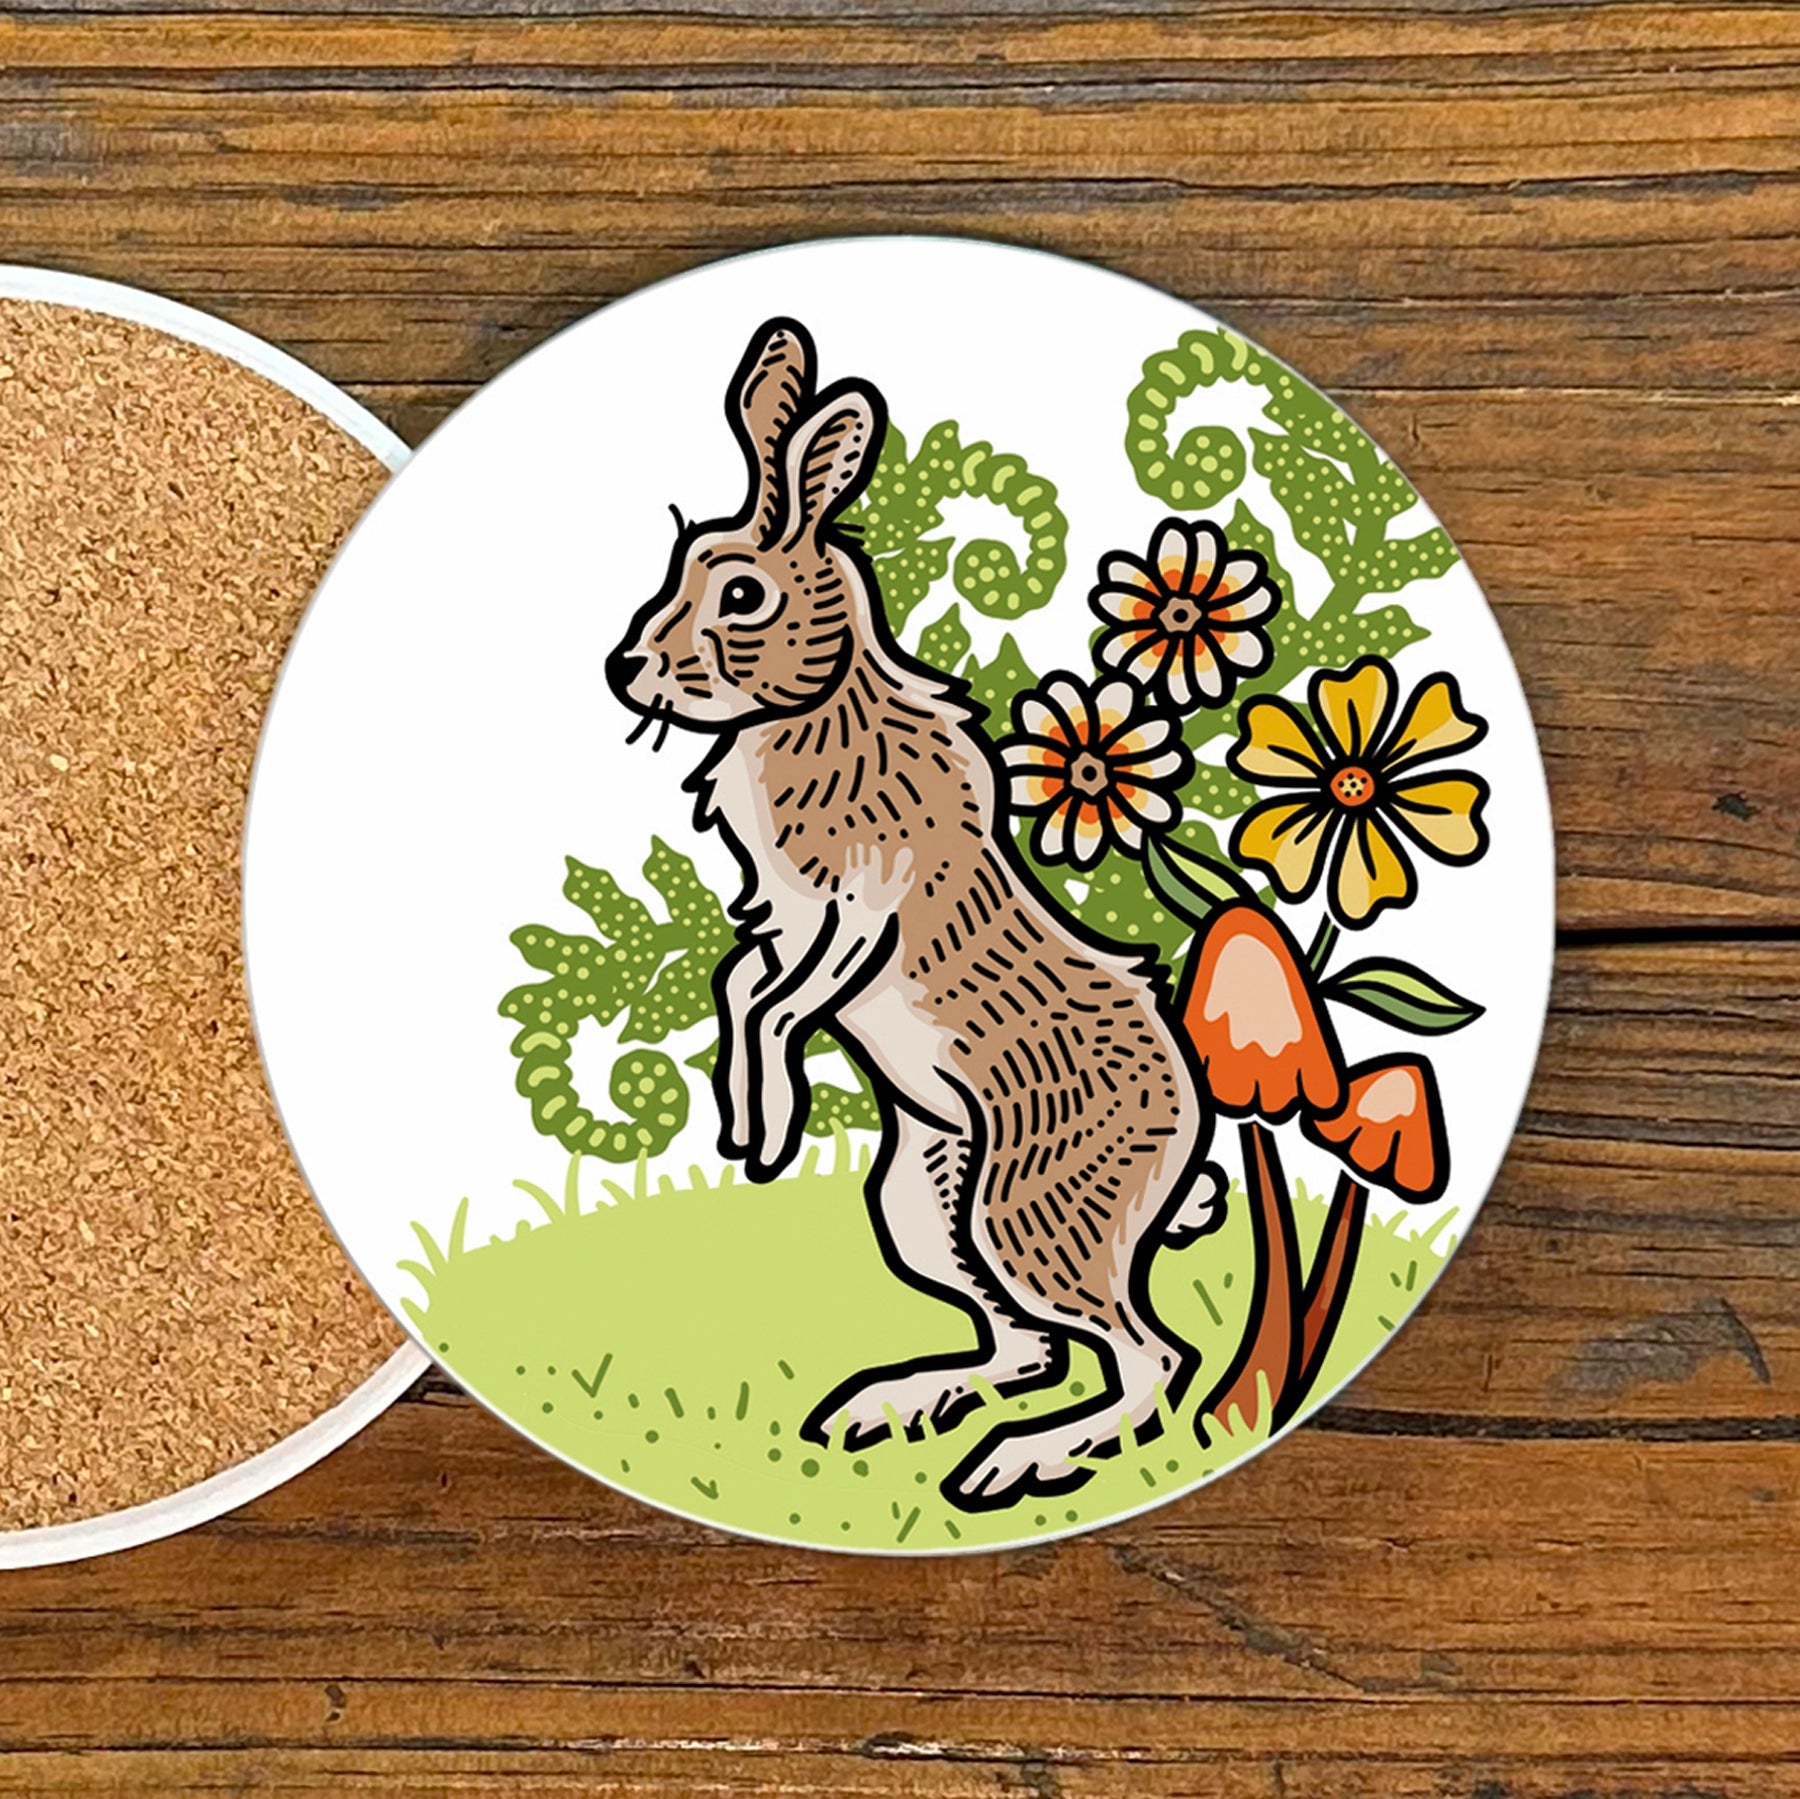 Rabbit Drink Coaster - Two Little Fruits